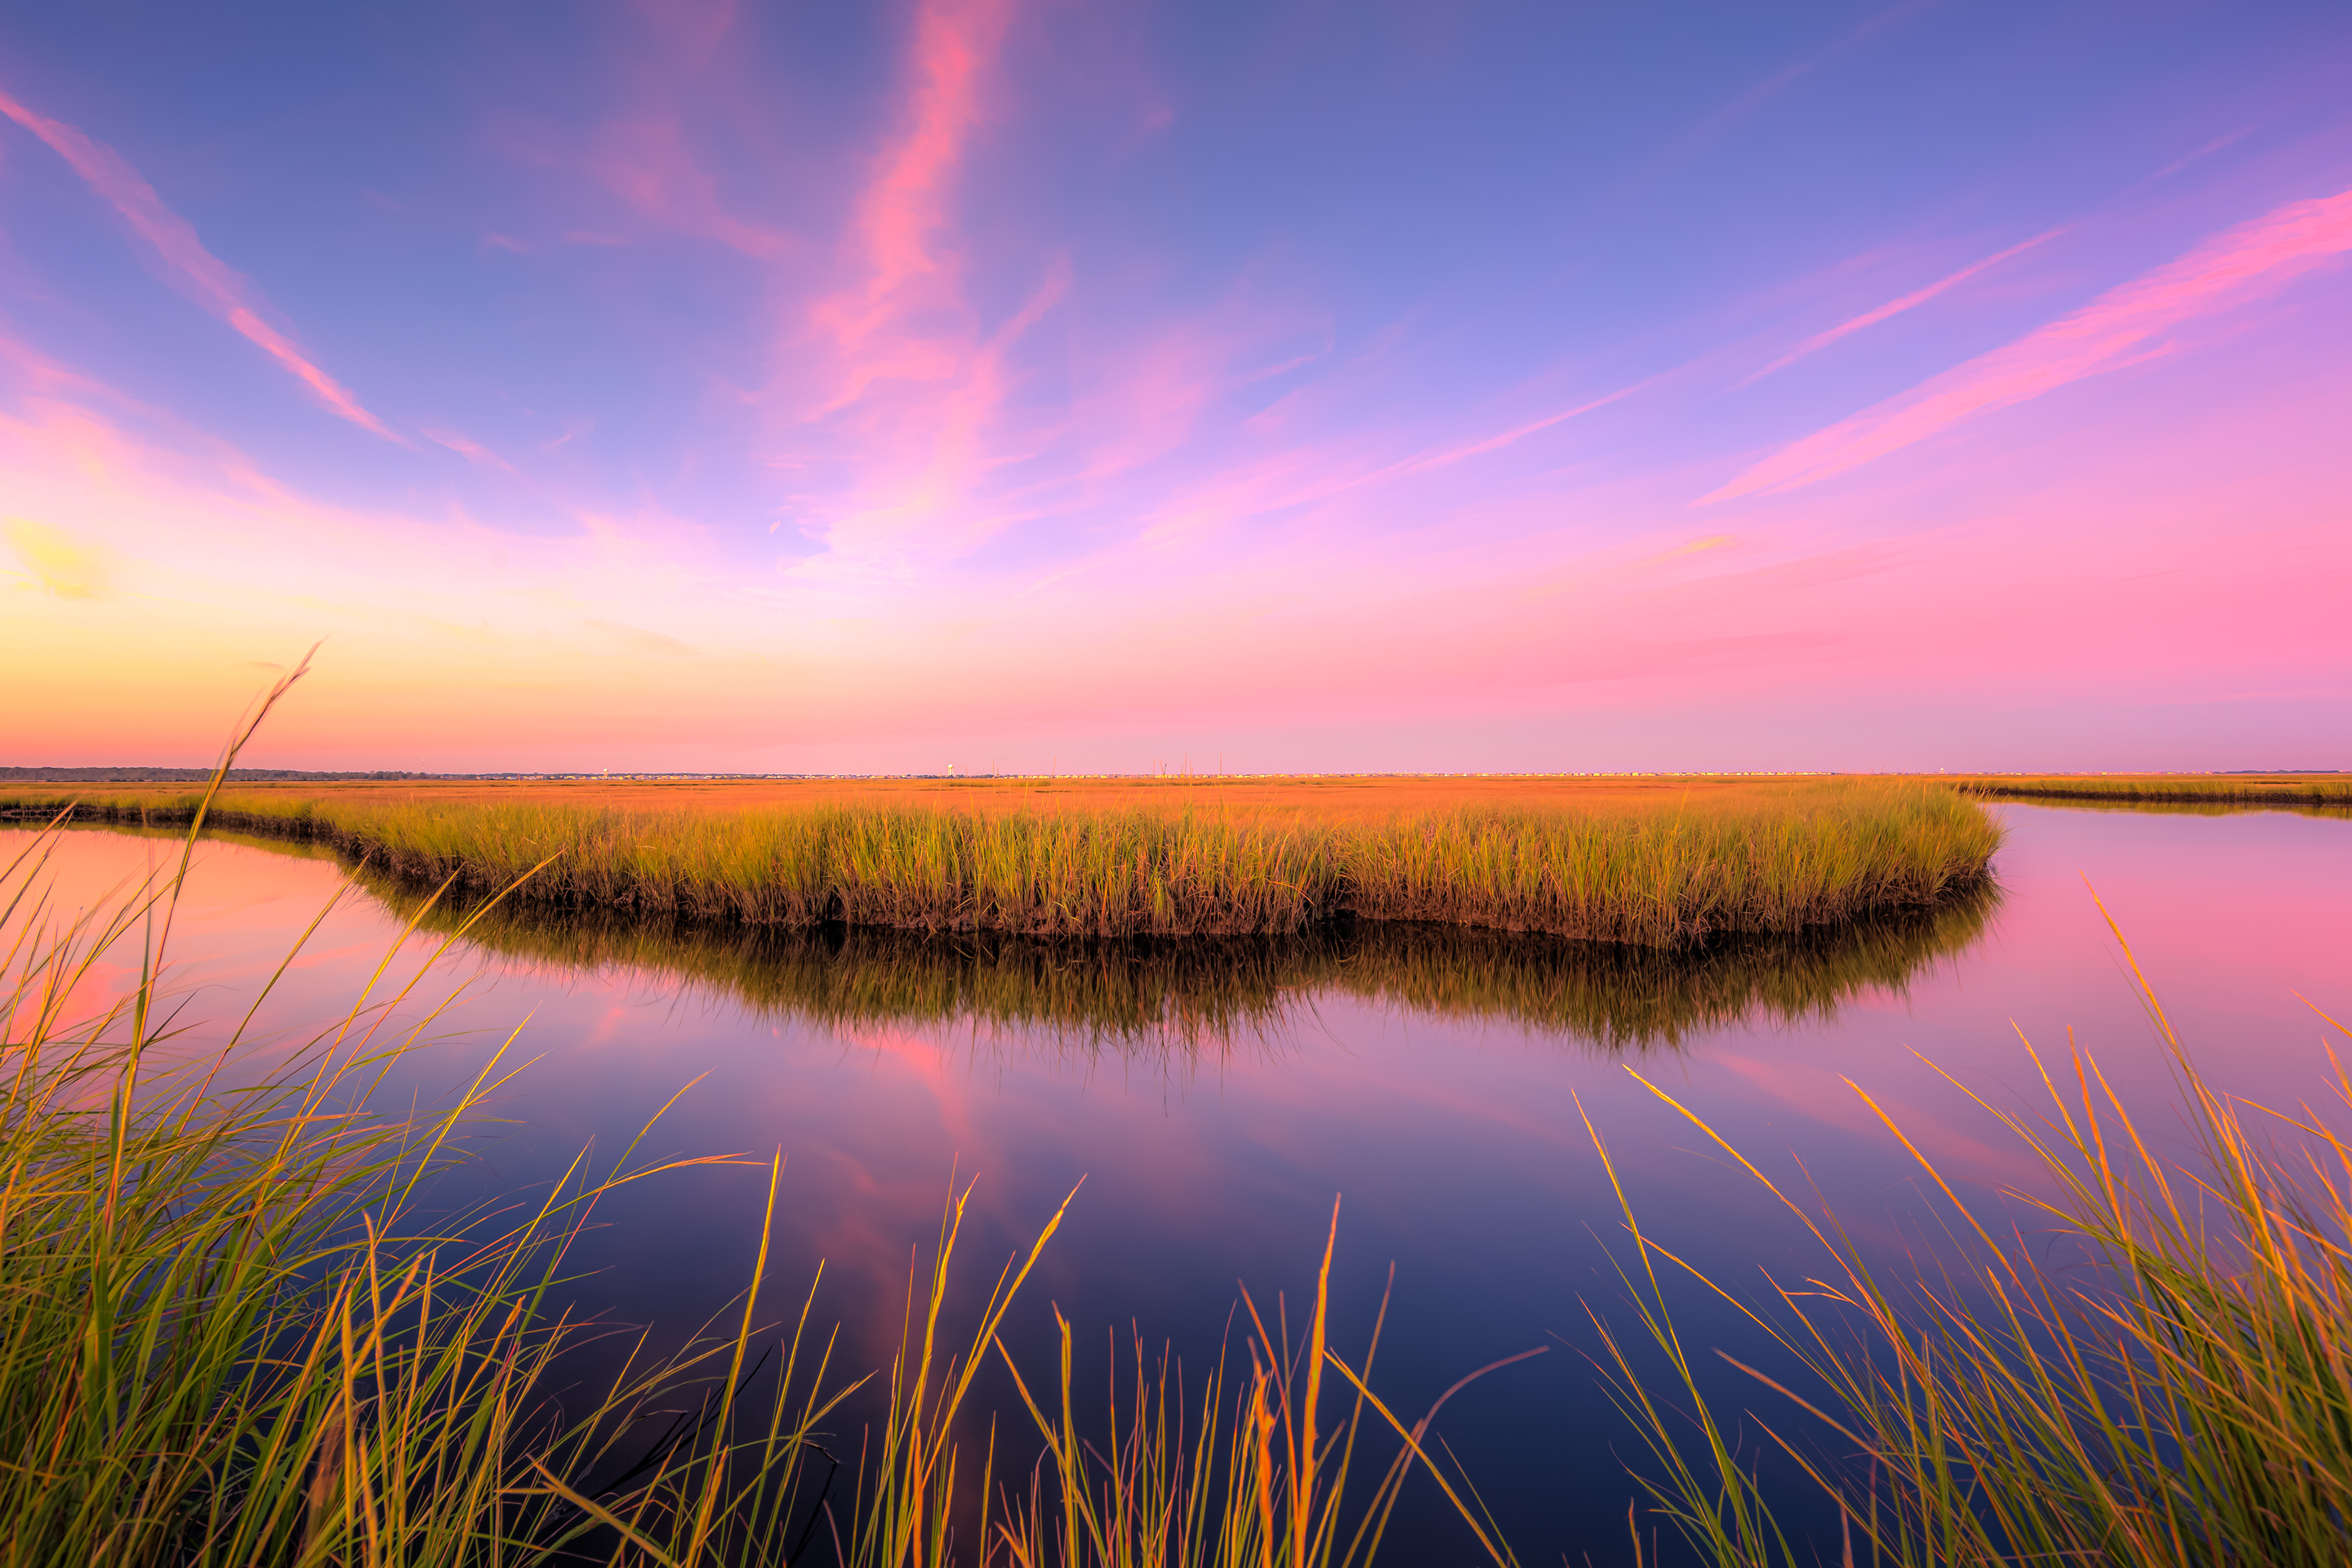 14mm wide angle sunset photo with pastel clouds, salt marsh, and calm reflective water.